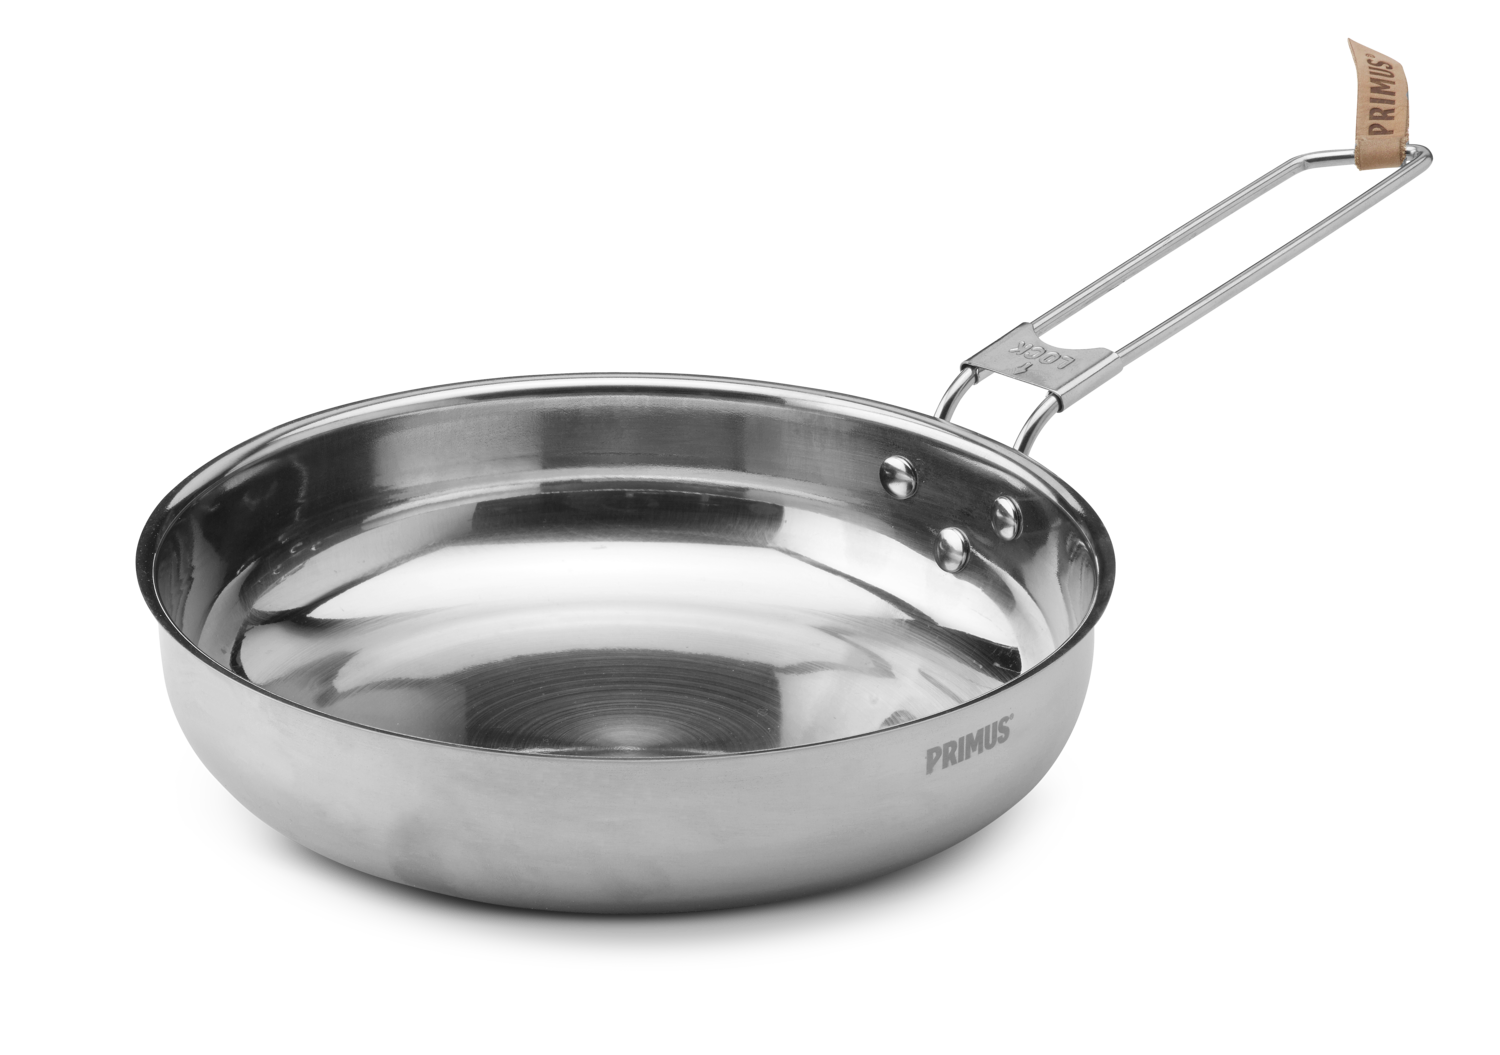 Primus CampFire Frying Pan Stainless Steel 21 cm